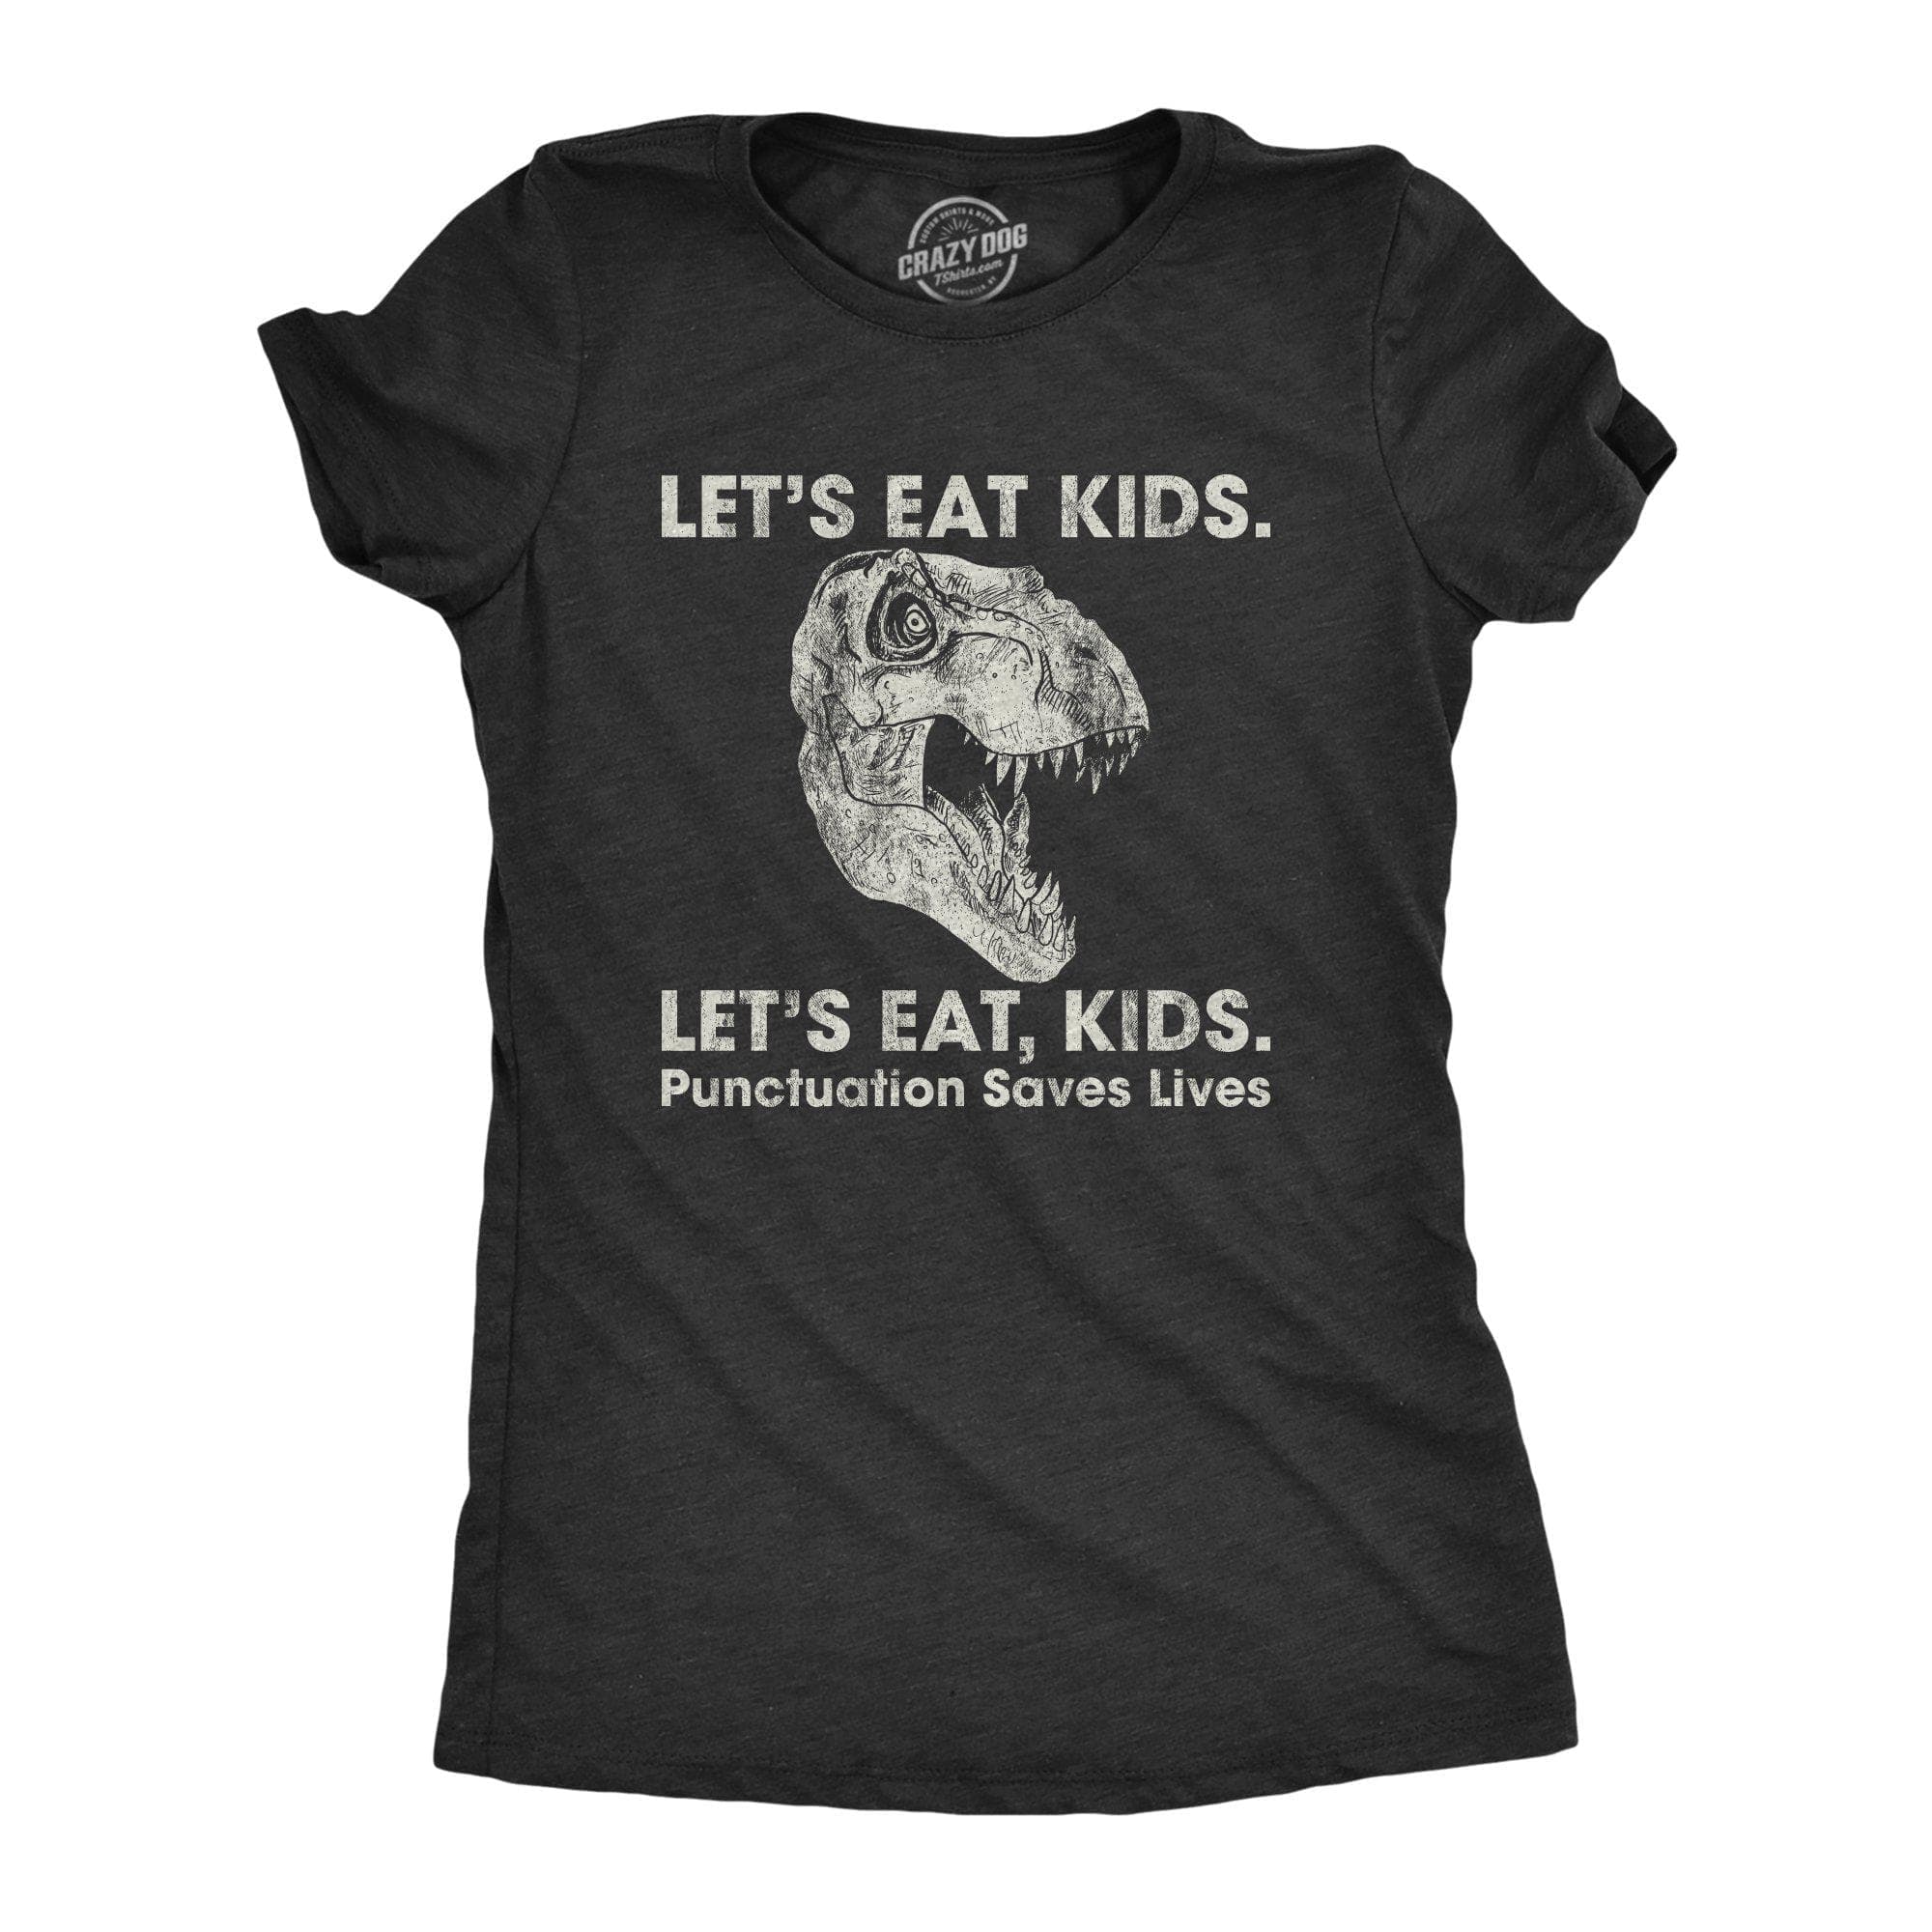 Lets Eat Kids Punctuation Saves Lives Women's Tshirt - Crazy Dog T-Shirts